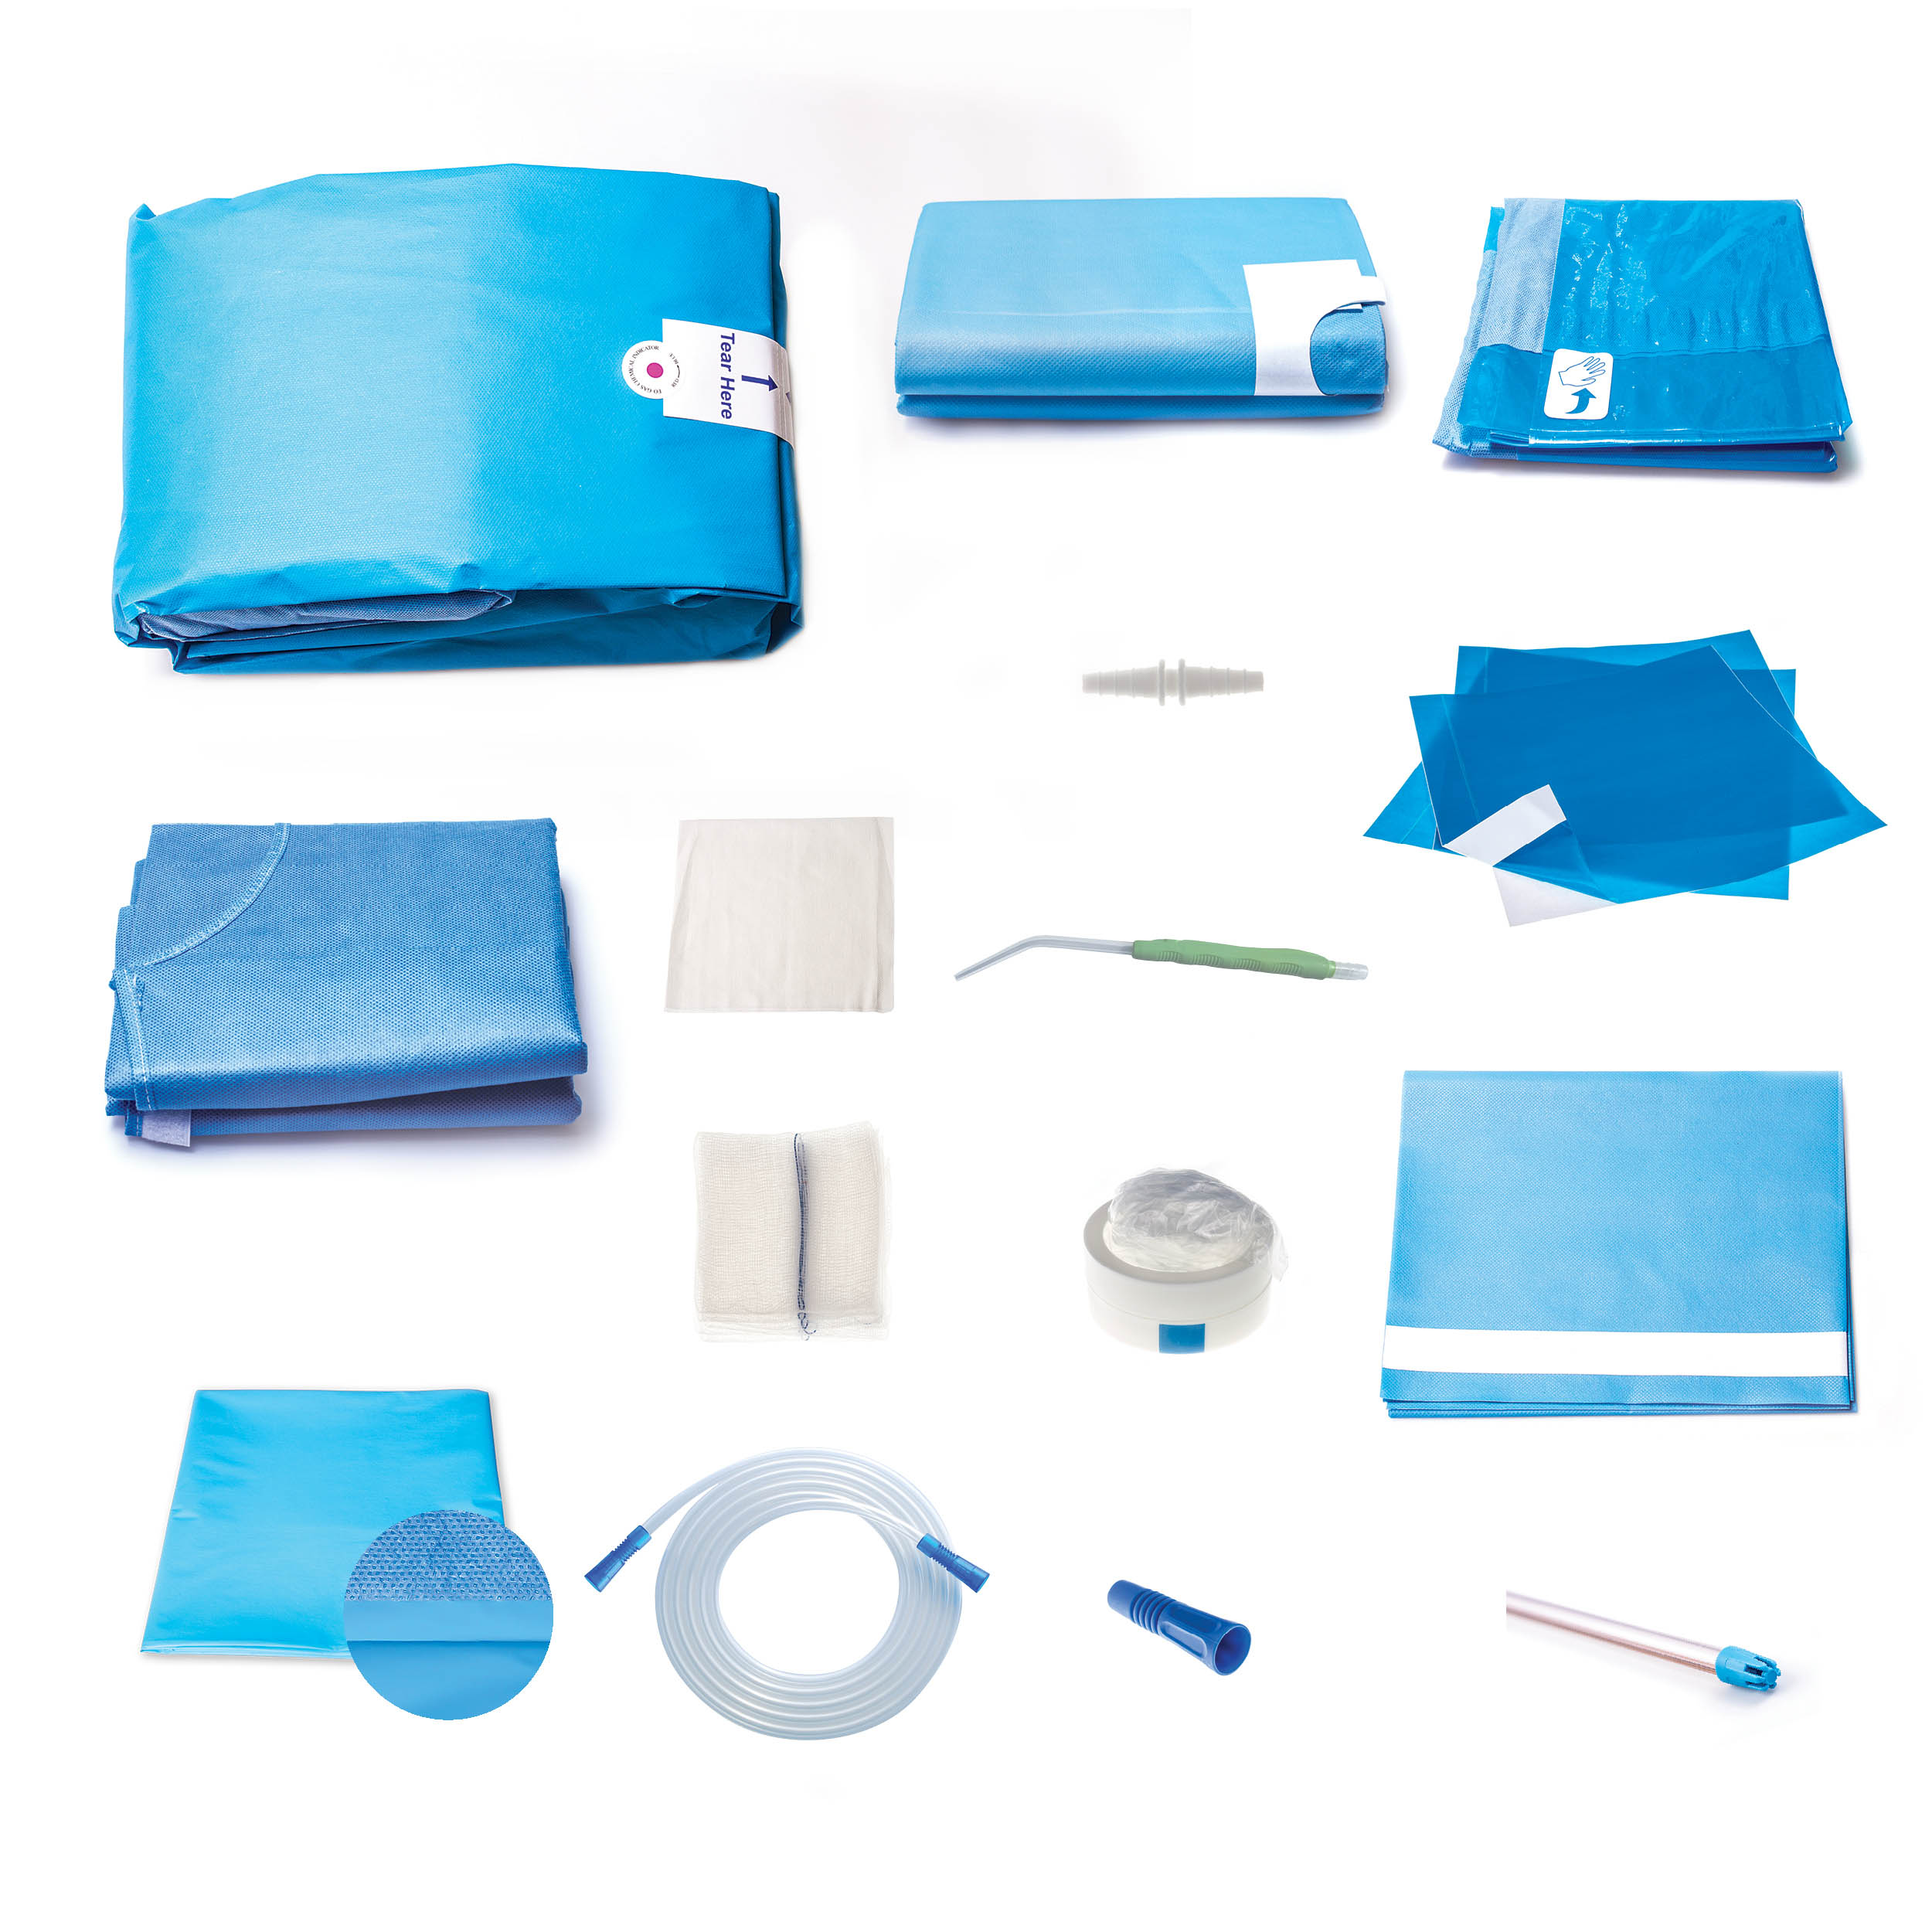 dental procedure pack creates an aseptic barrier during oral surgery